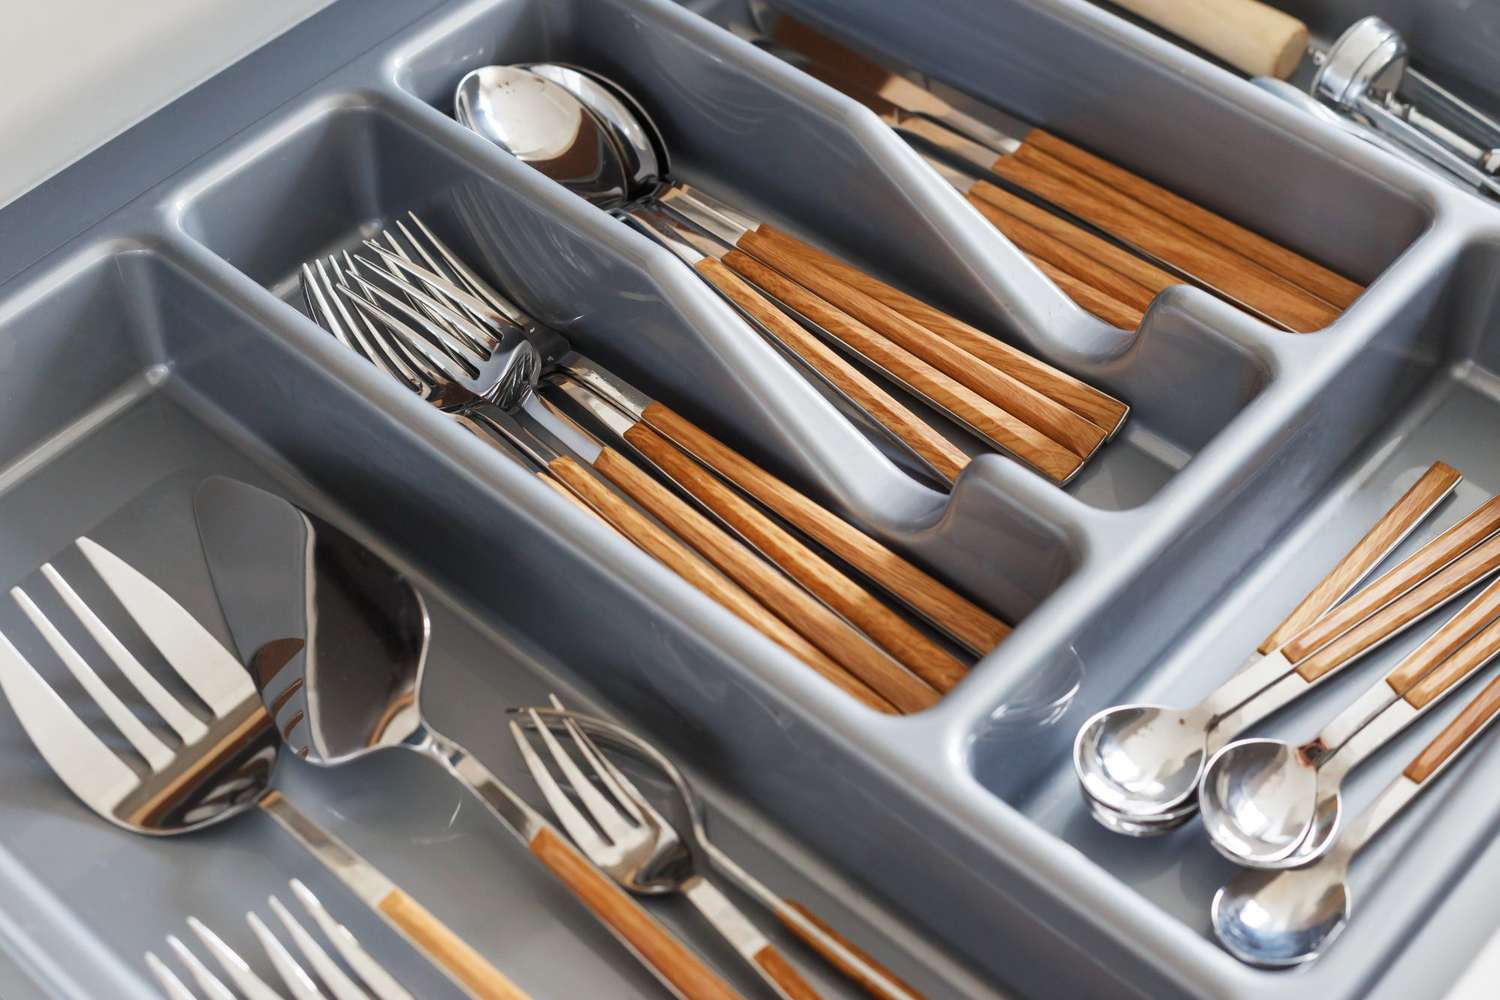 Store Utensils in a Drawer